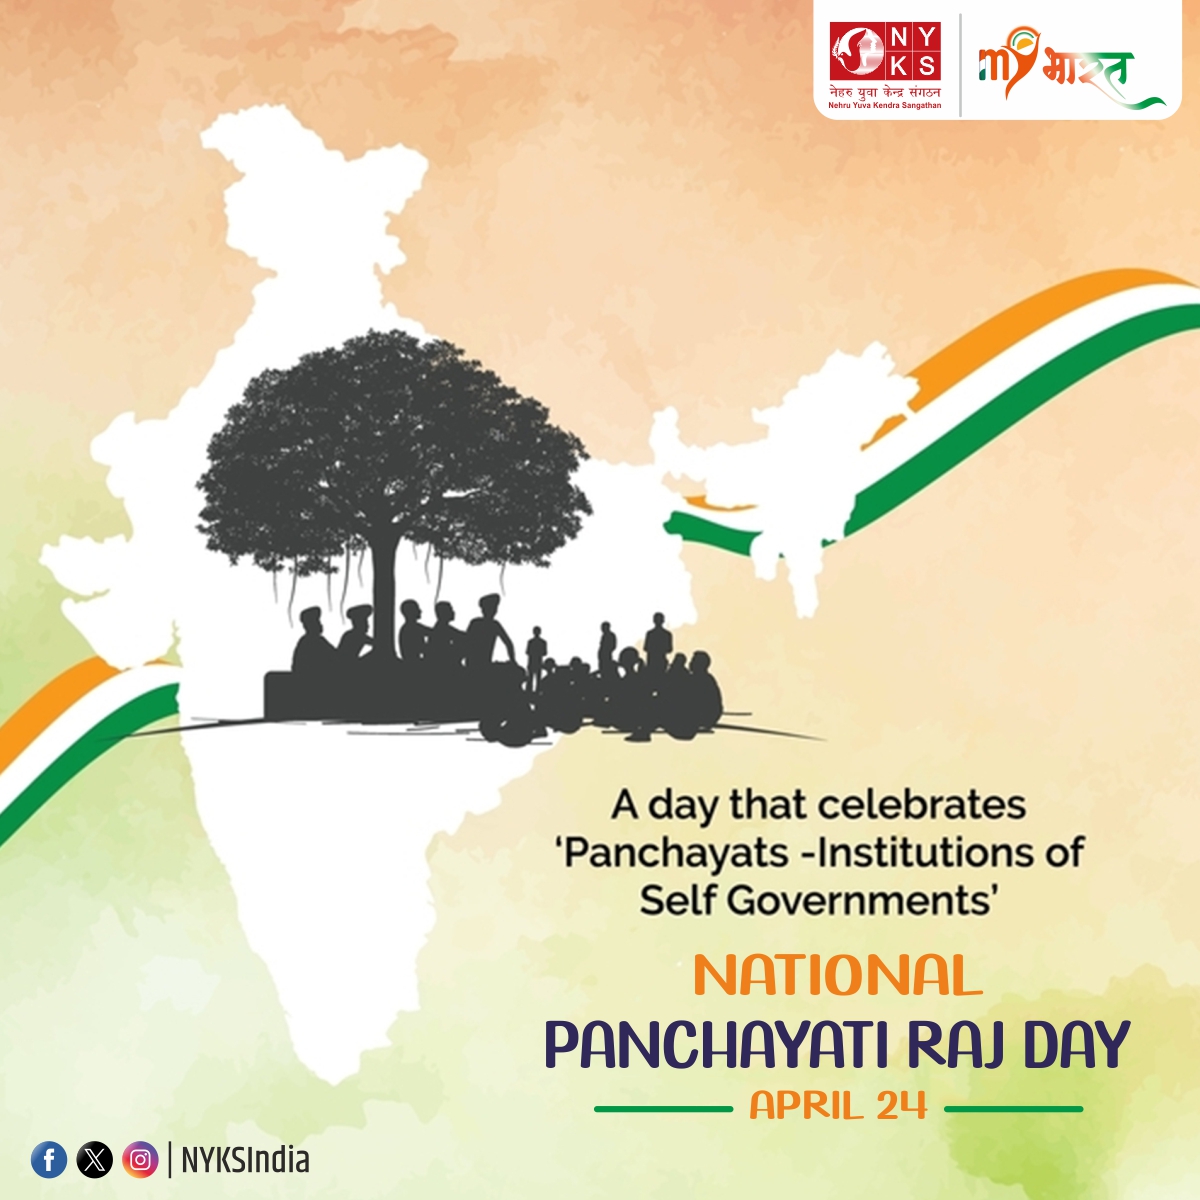 Empowering grassroots governance: Celebrating National Panchayati Raj Day! 🌱 Let's honour the strength of local democracy and the tireless efforts of our Panchayats in shaping the future of our communities. 
#PanchayatiRajDay #LocalGovernance #Empowerment